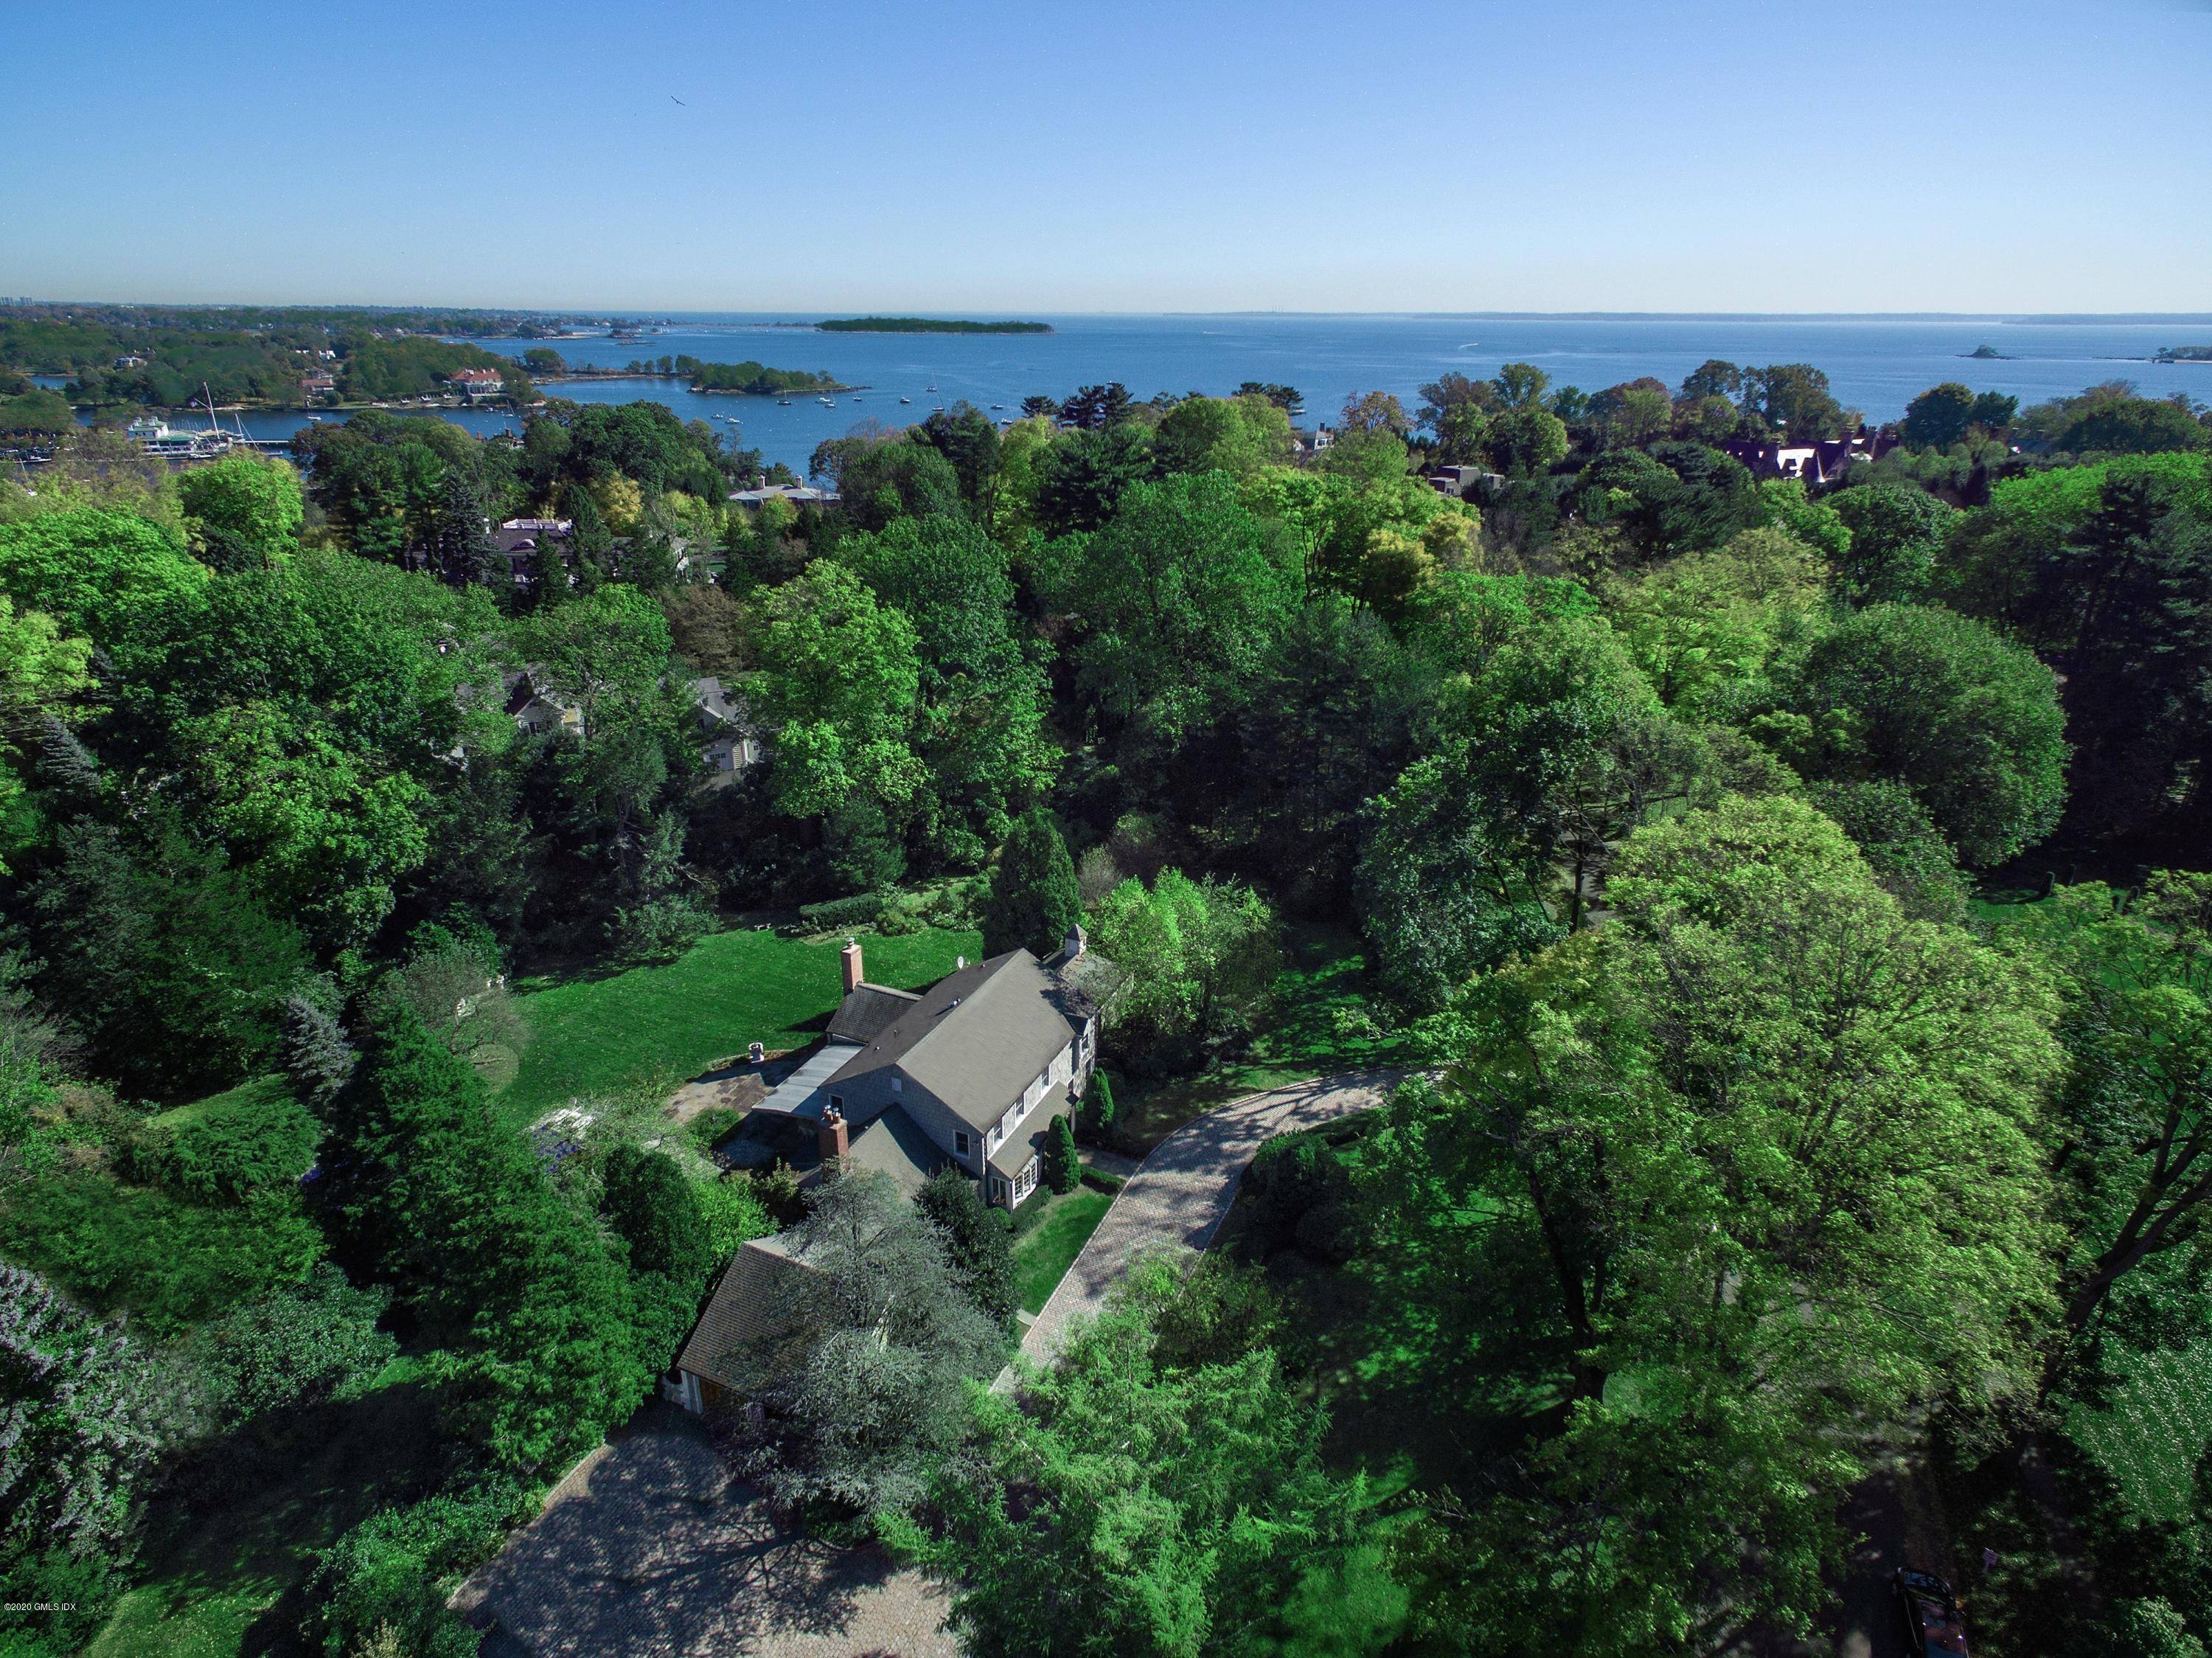 Field Point Circle on an exceptional, nearly 3 acre level property with magnificent trees, elaborate landscaping and amazing privacy with a 24 hour security booth.